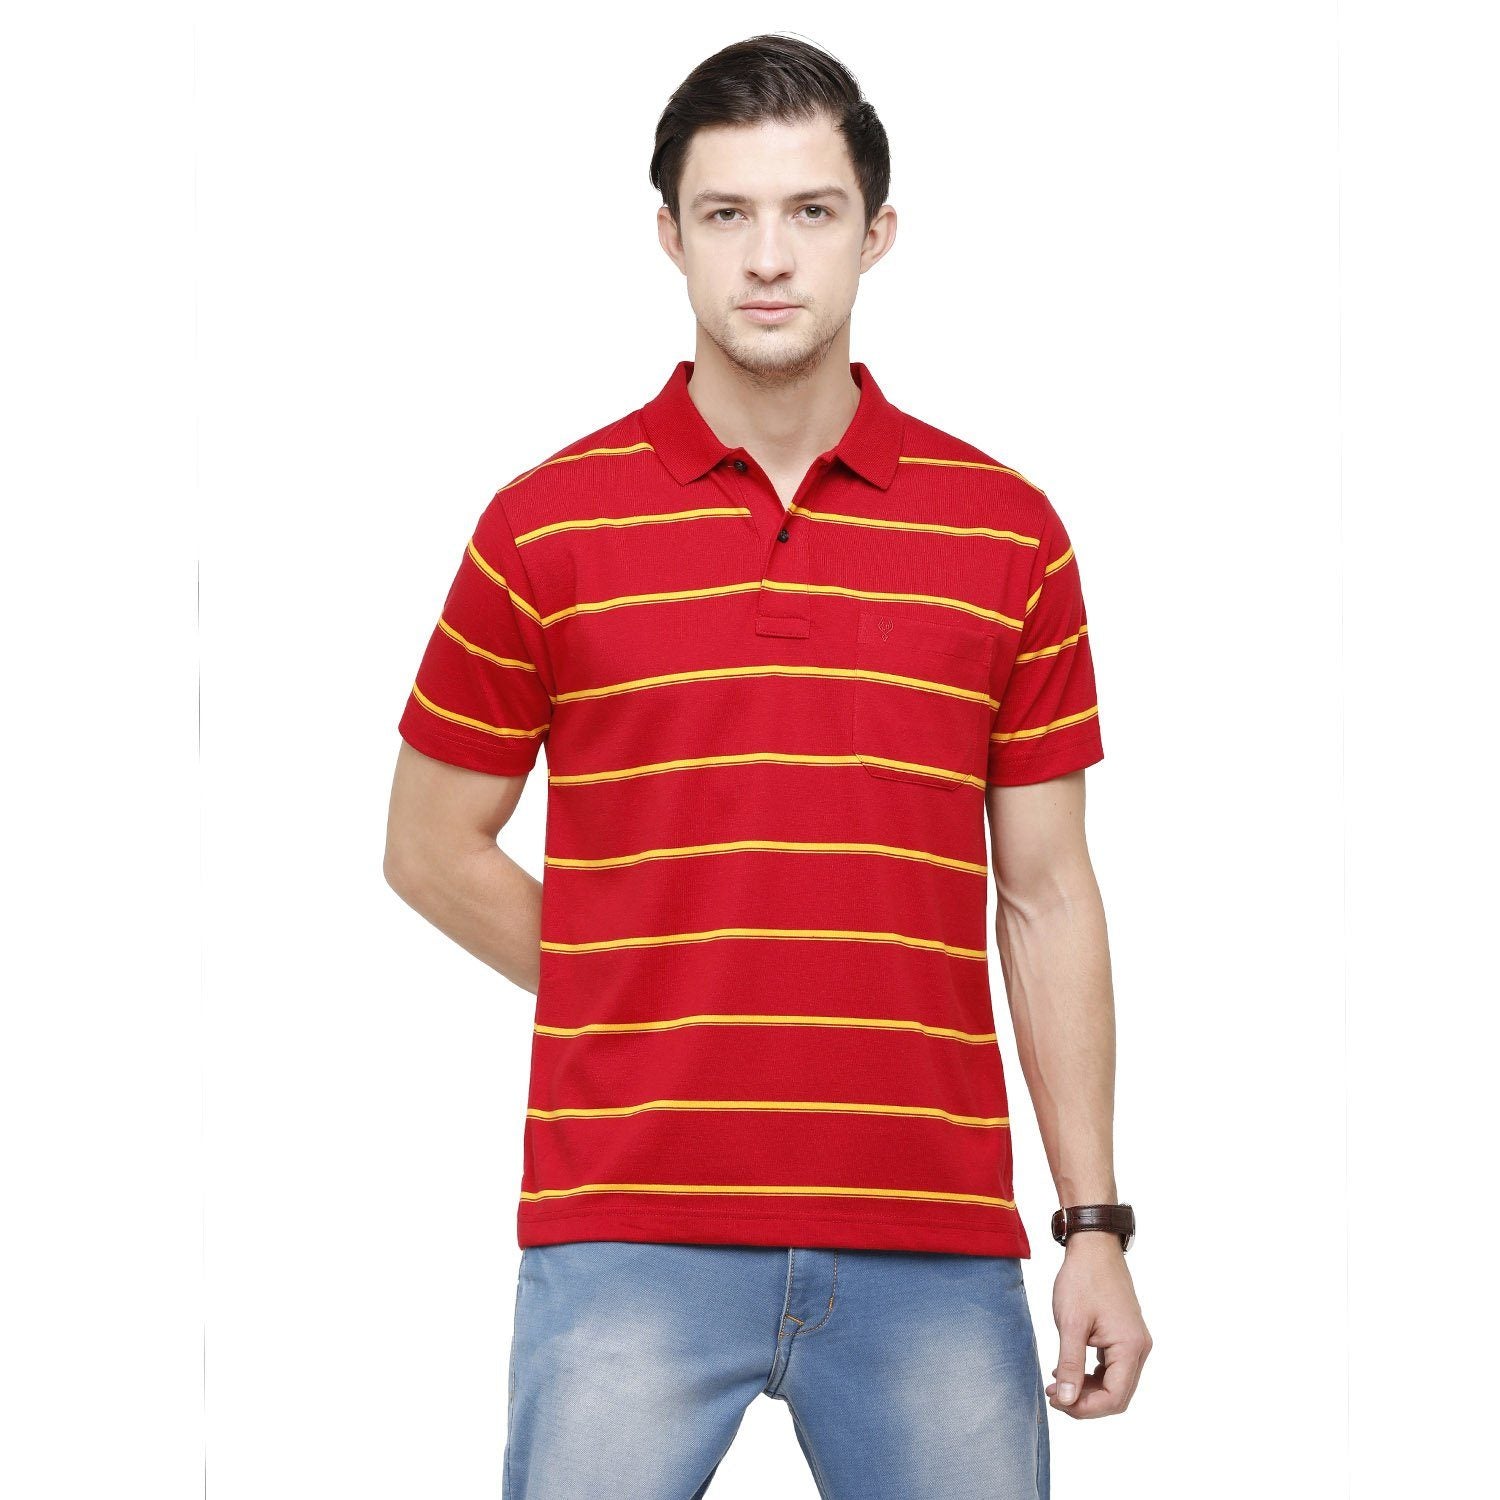 Classic Polo Mens Striped Polo Neck Half Sleeve Regular Fit Cotton Polyester Blend Red Fashion T-Shirt ( AVON - 461 A AF P ) T-shirt Classic Polo 